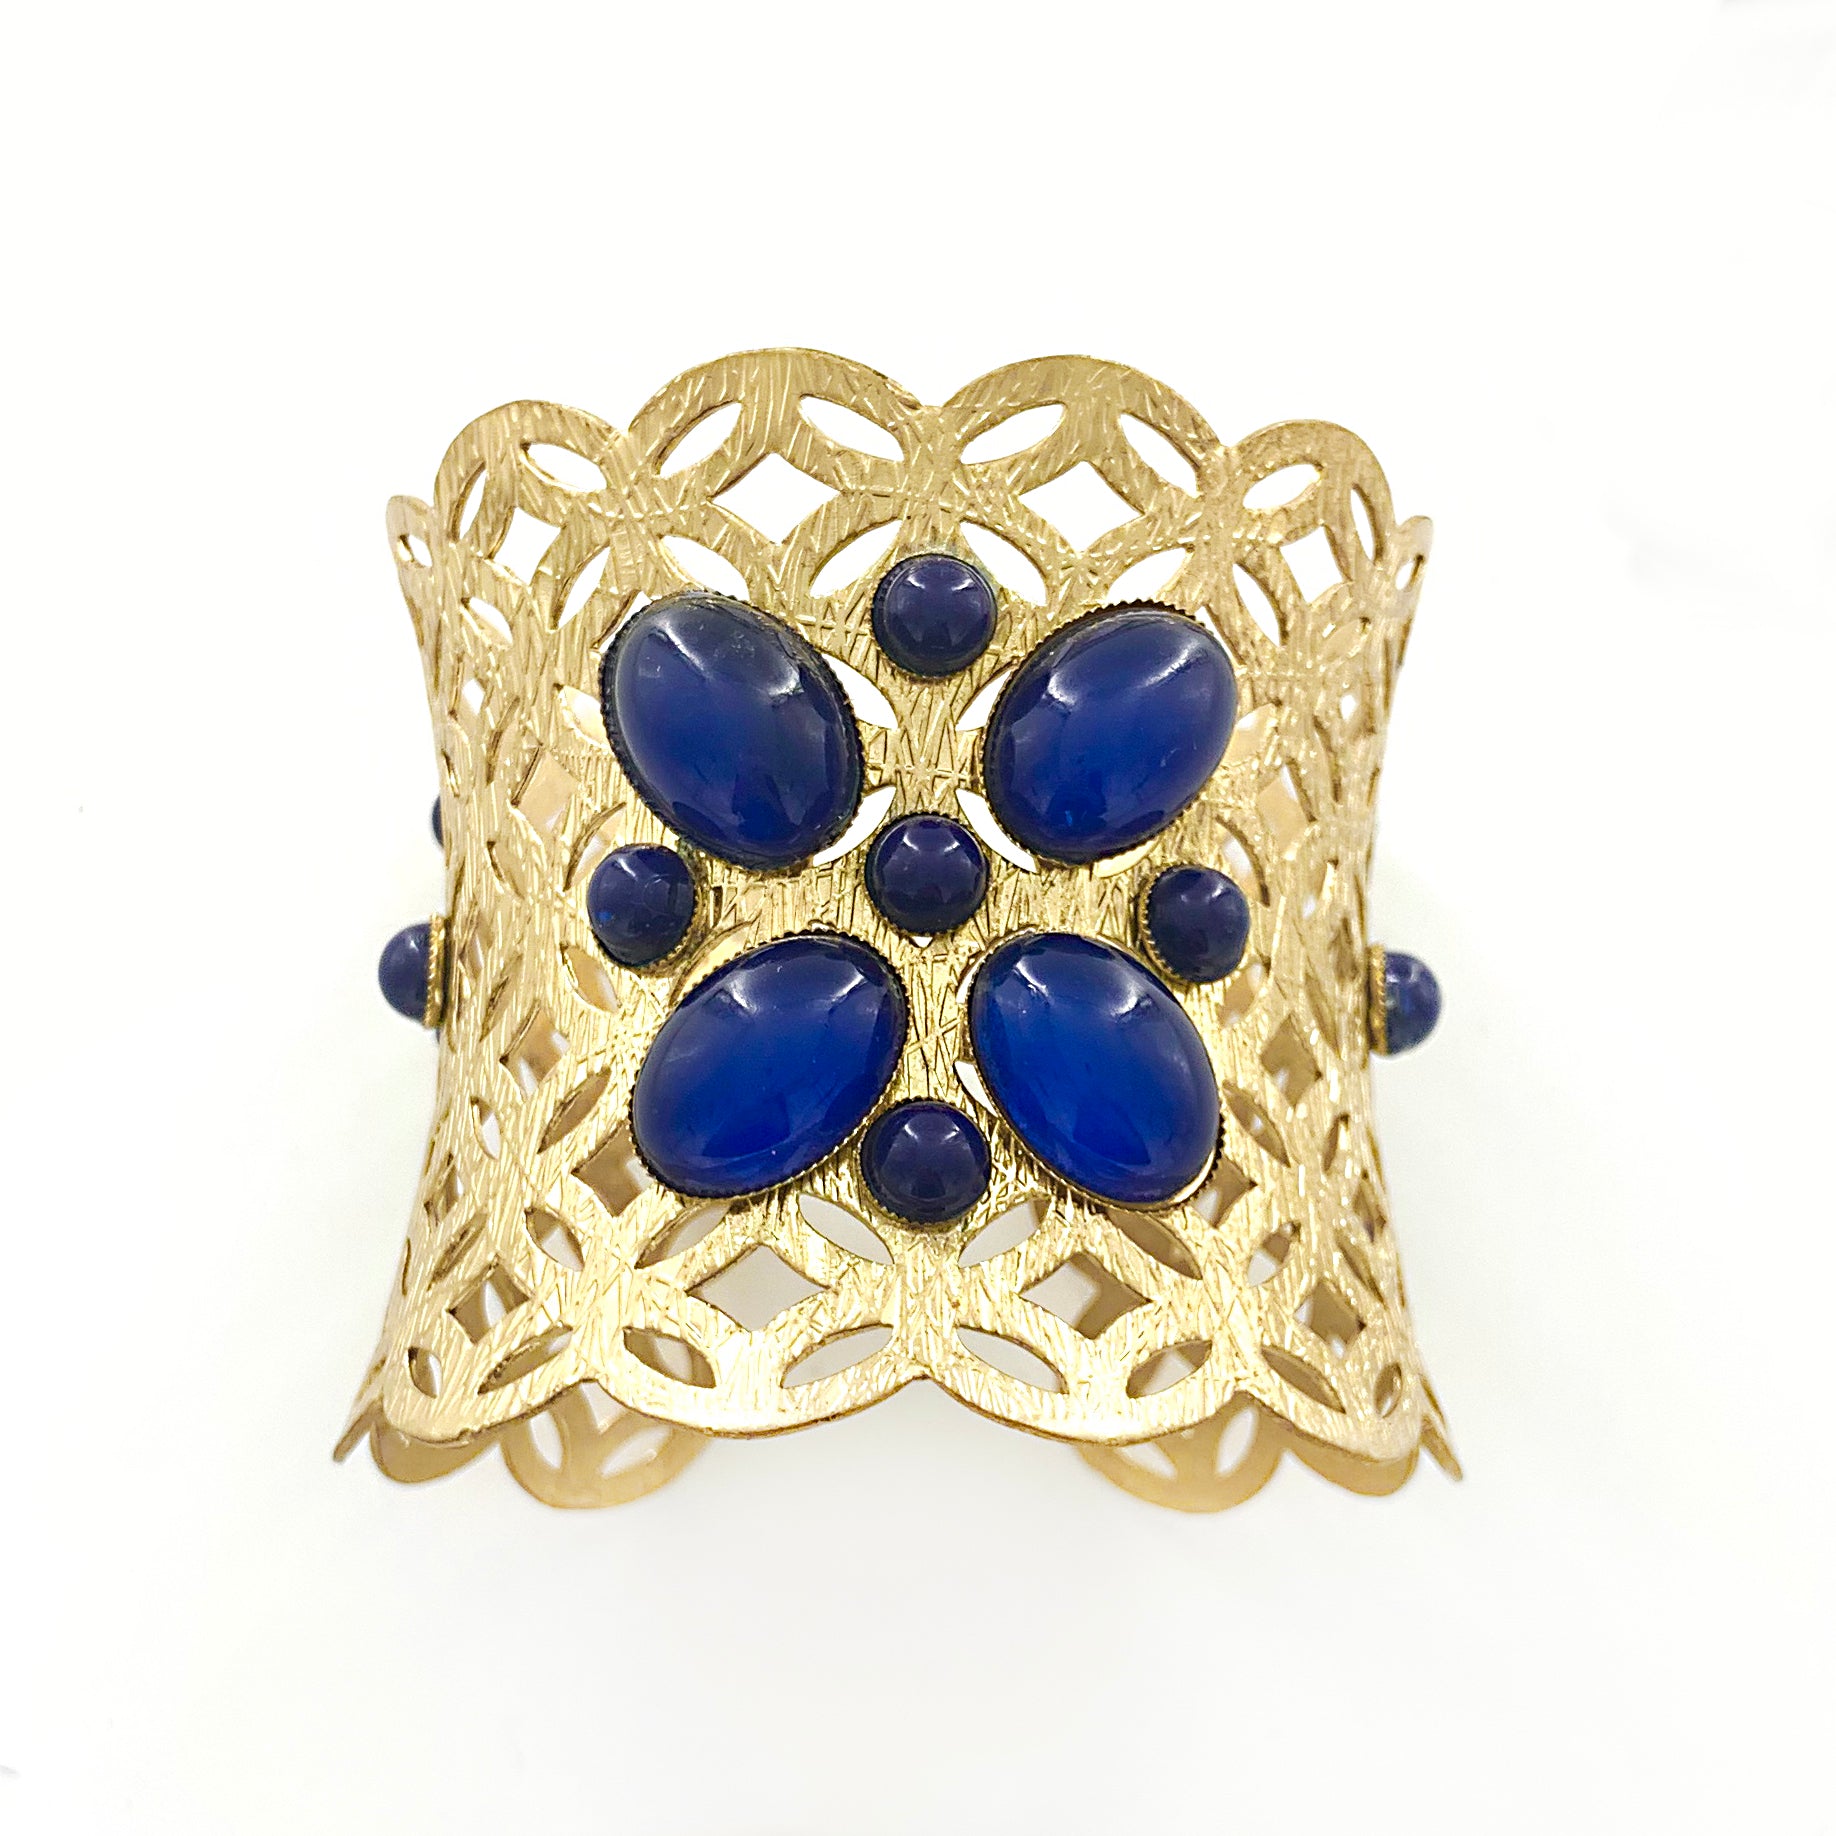 Matt gold cuff with geometric cut-outs and blue beads